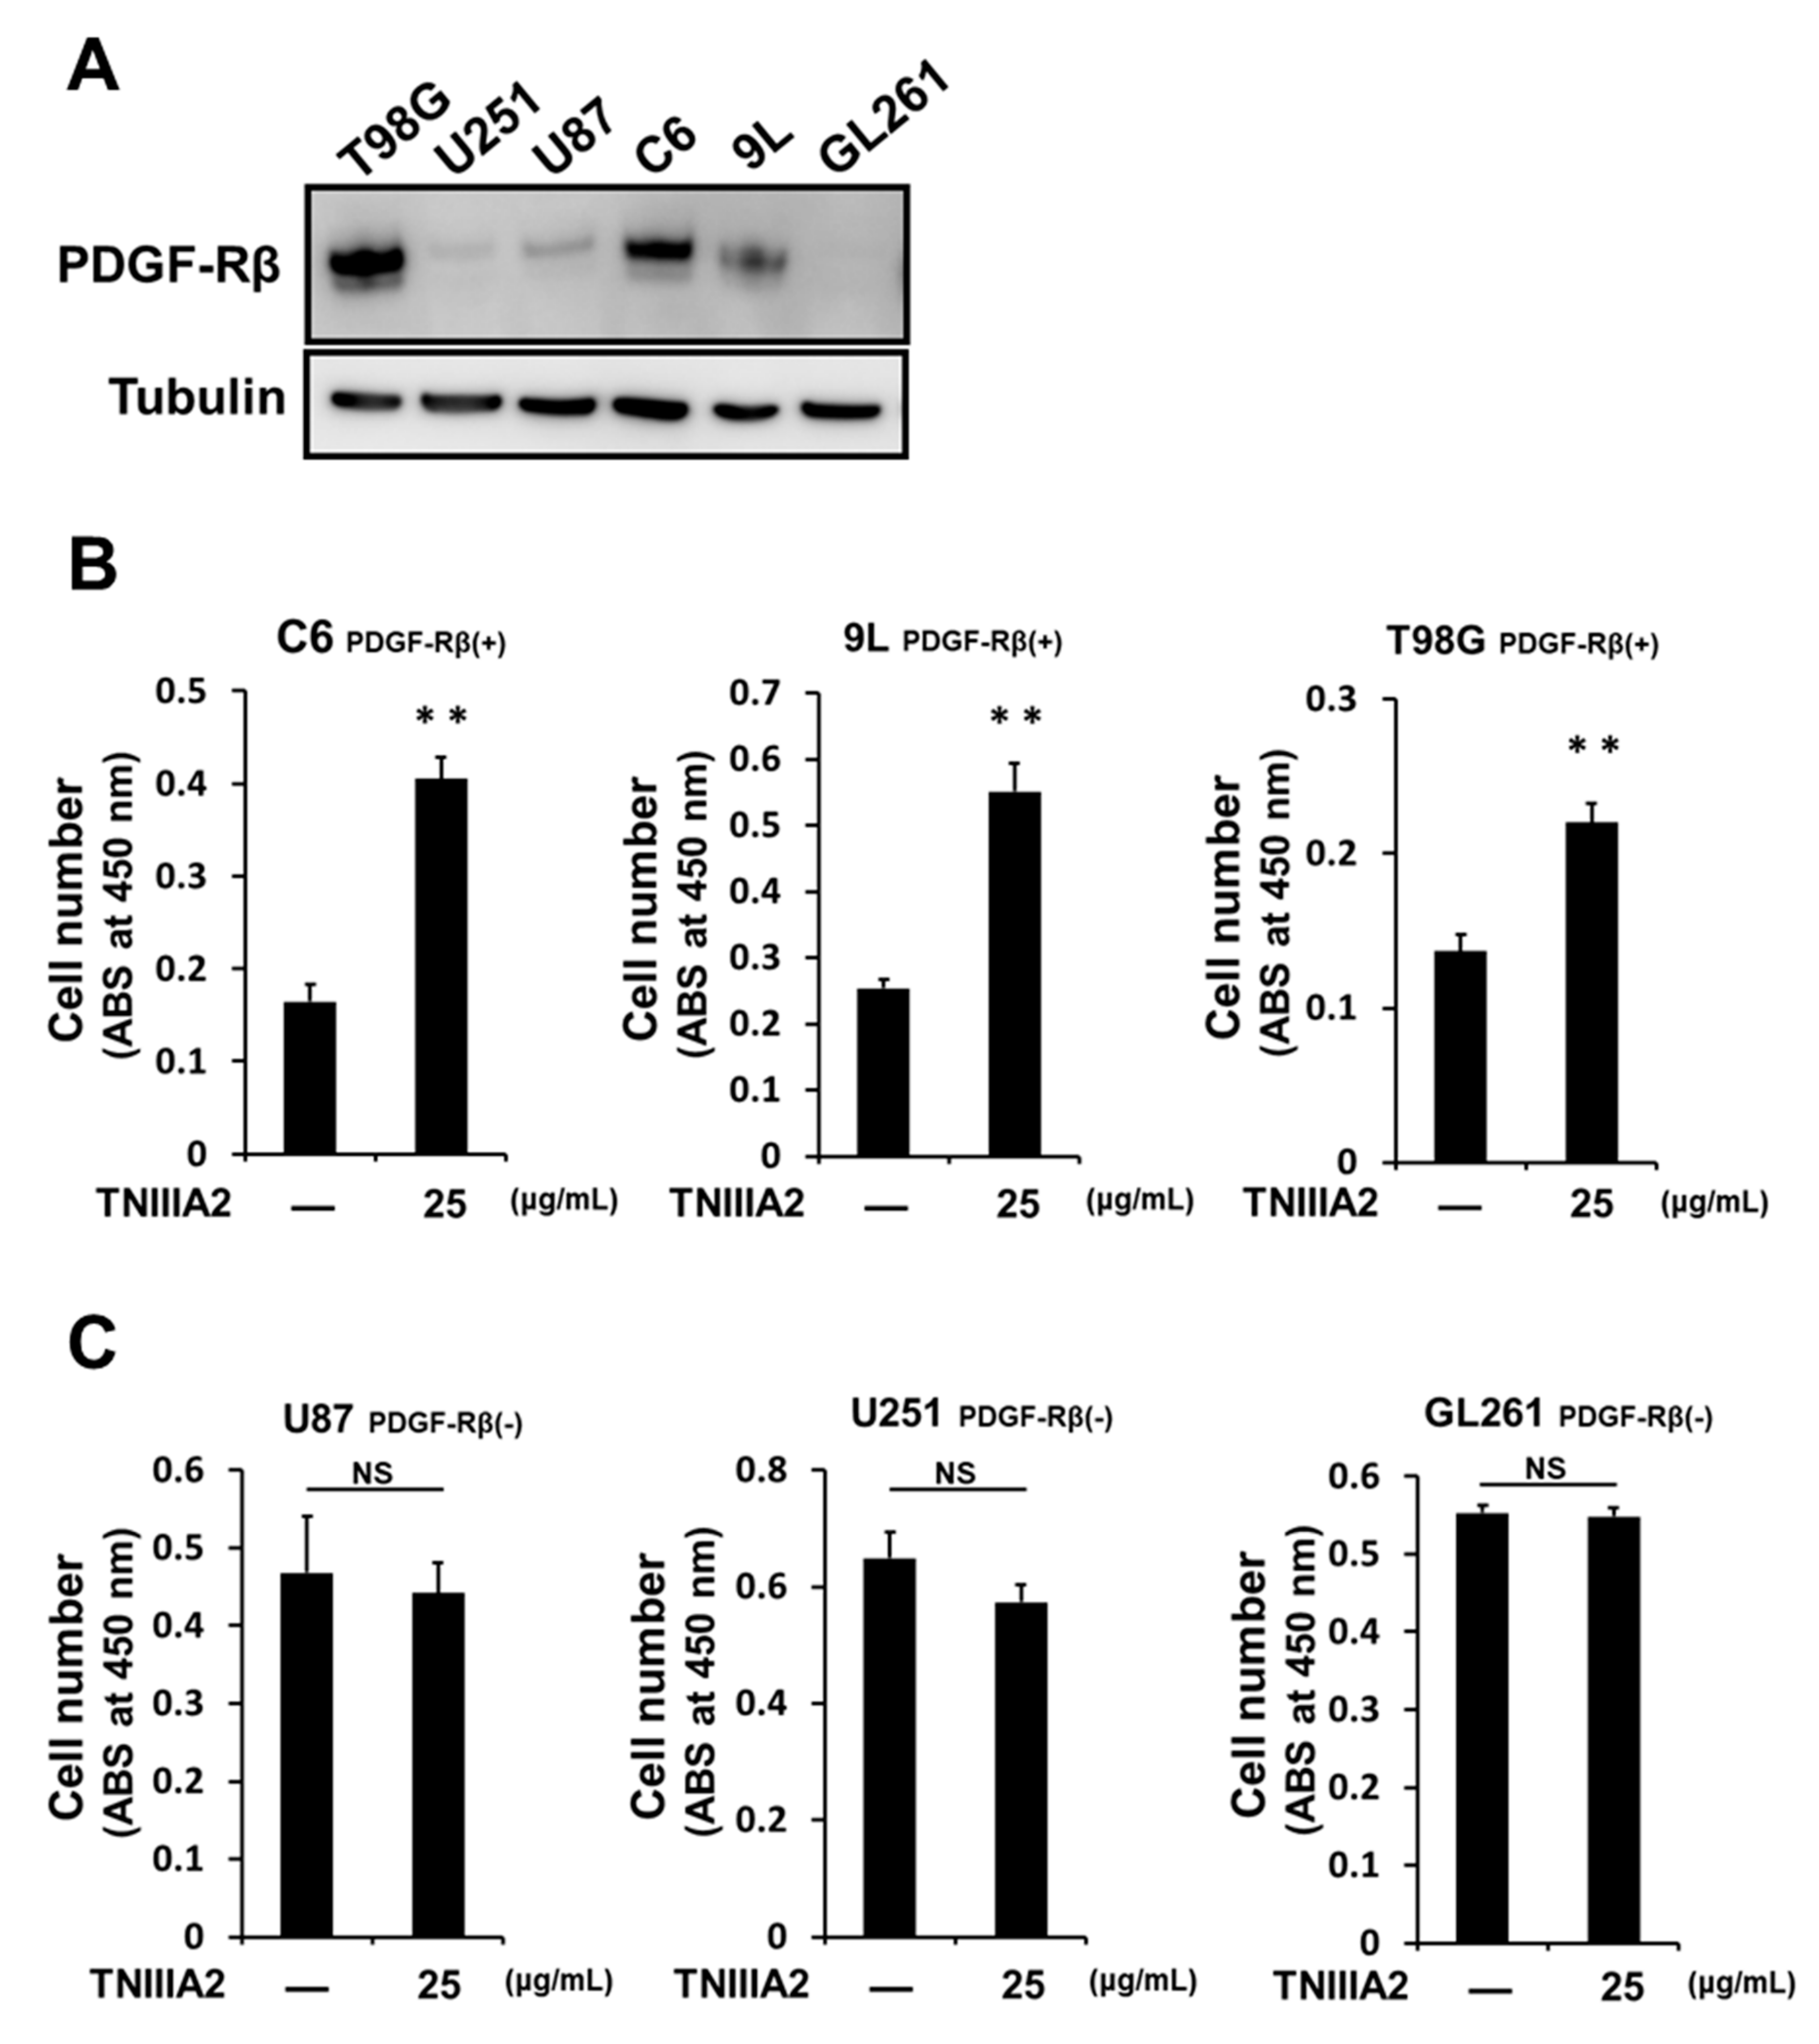 Ijms Free Full Text Autocrine Production Of Pdgf Stimulated By The Tenascin C Derived Peptide Tniiia2 Induces Hyper Proliferation In Glioblastoma Cells Html